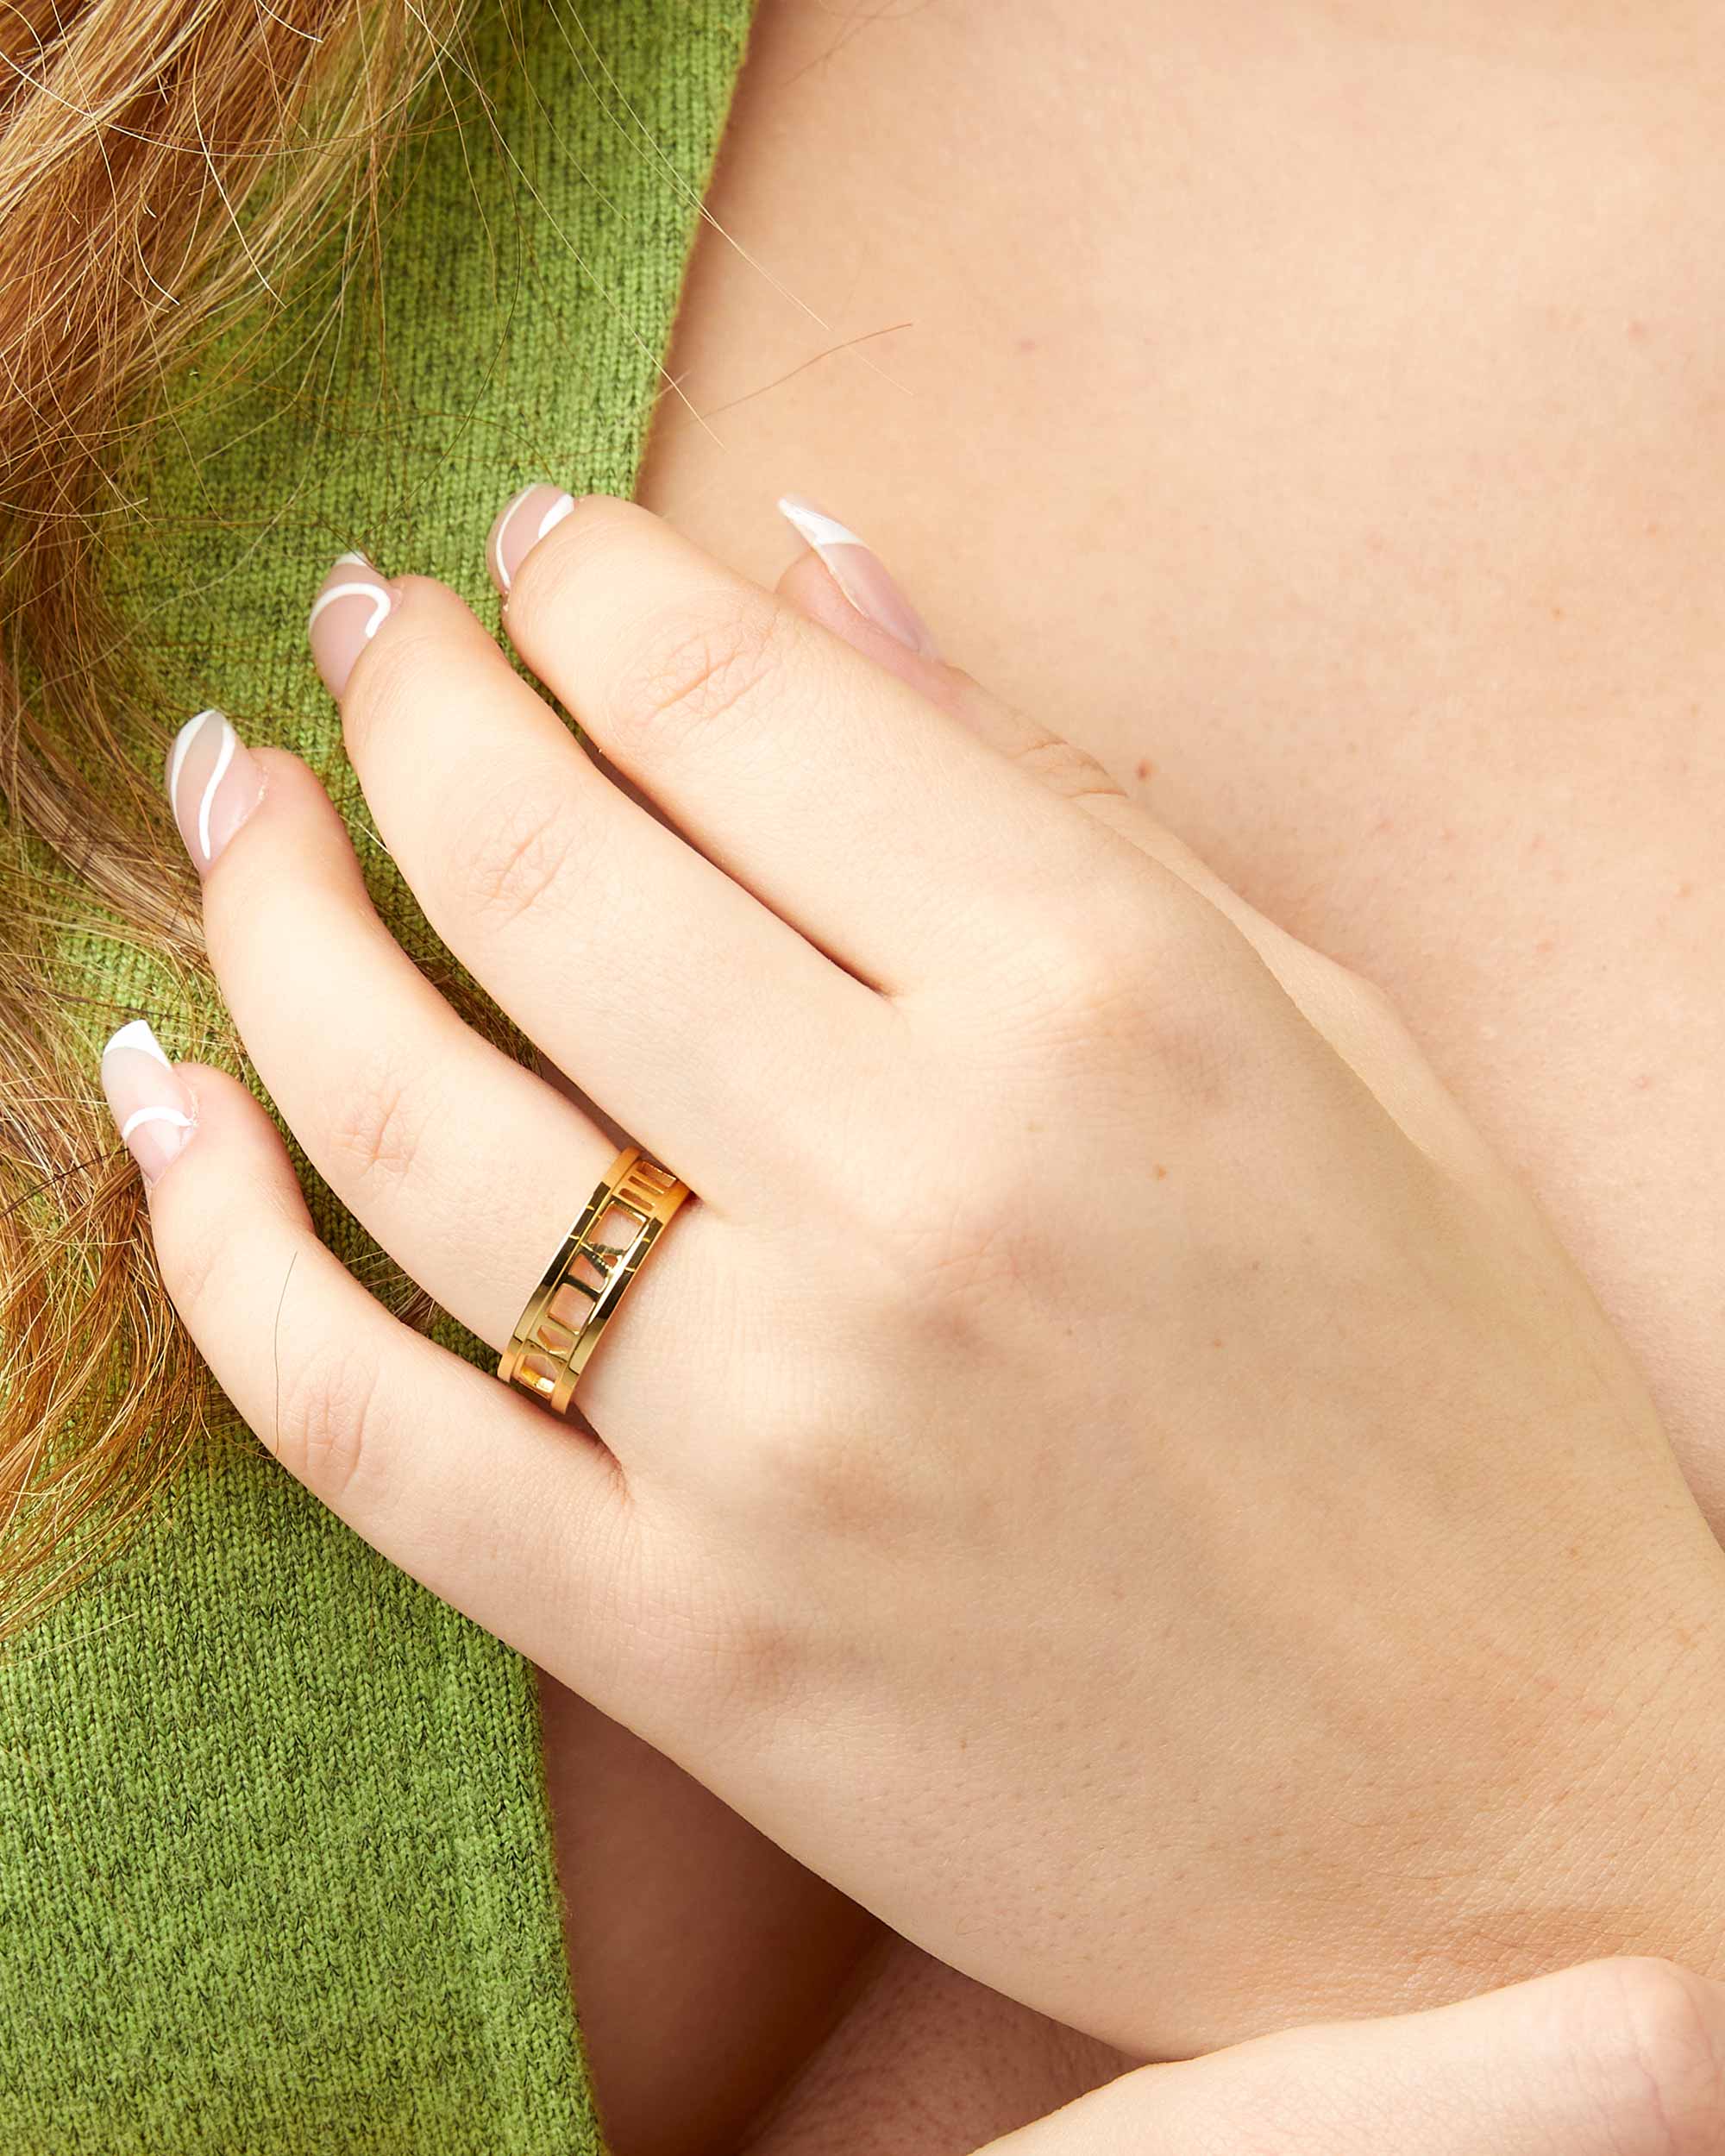 Gold Roman Numeral Ring